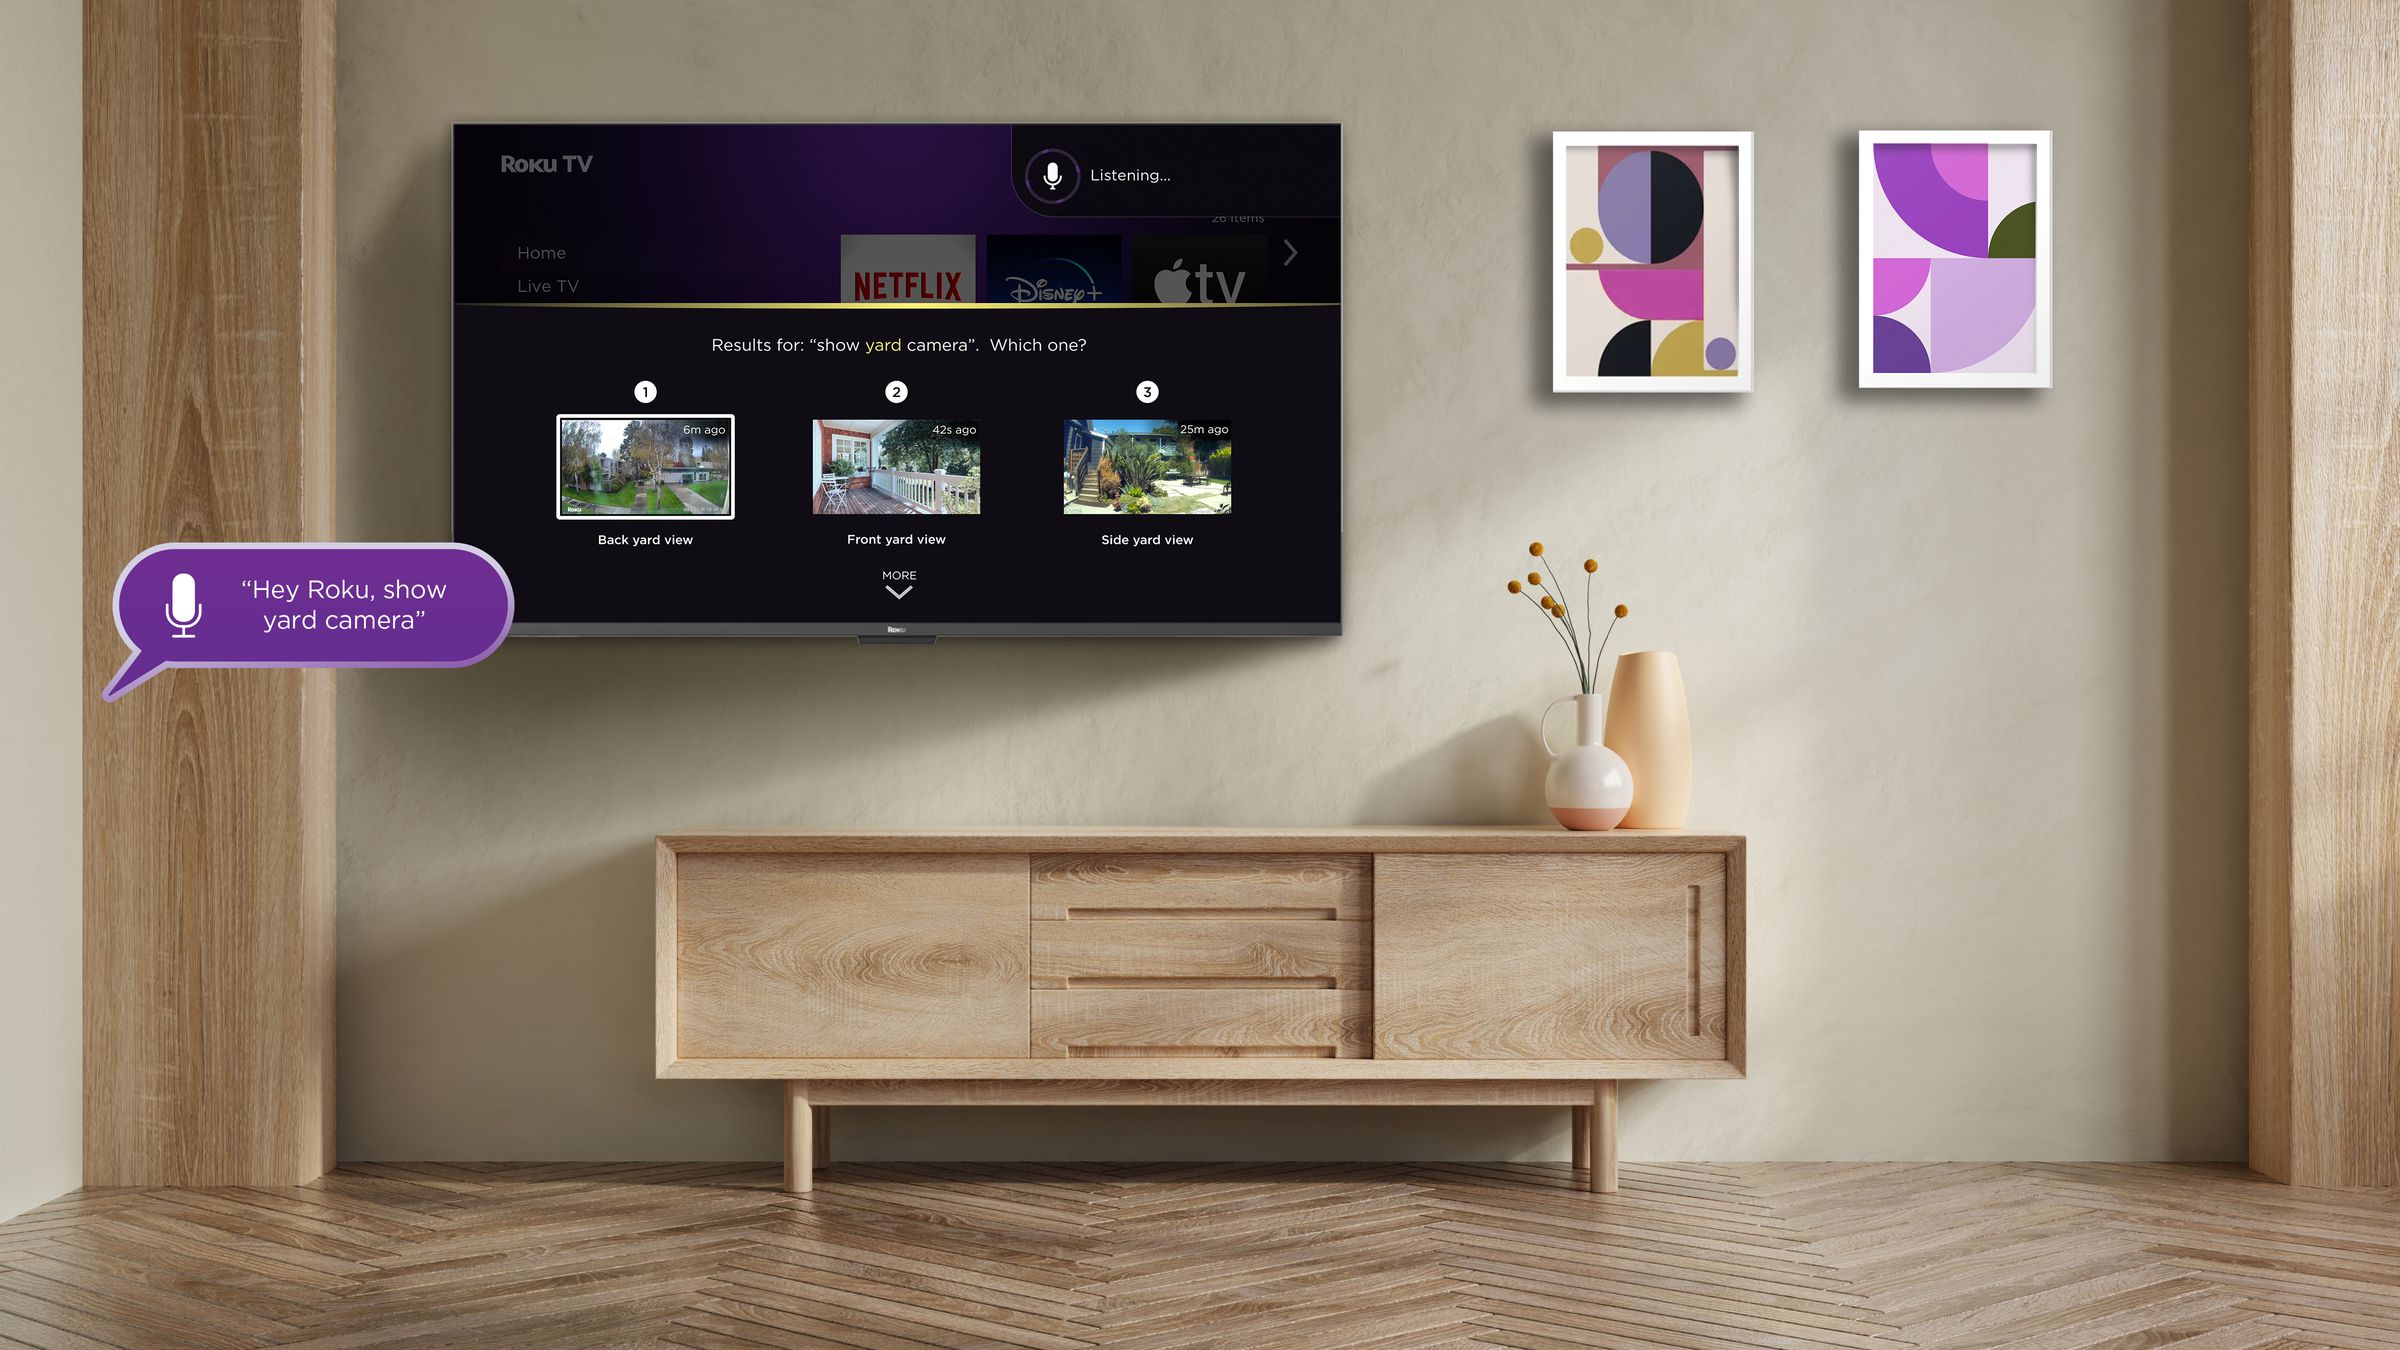 Roku is integrating its new security system with its TV OS and offering improved camera control functions on the big screen.